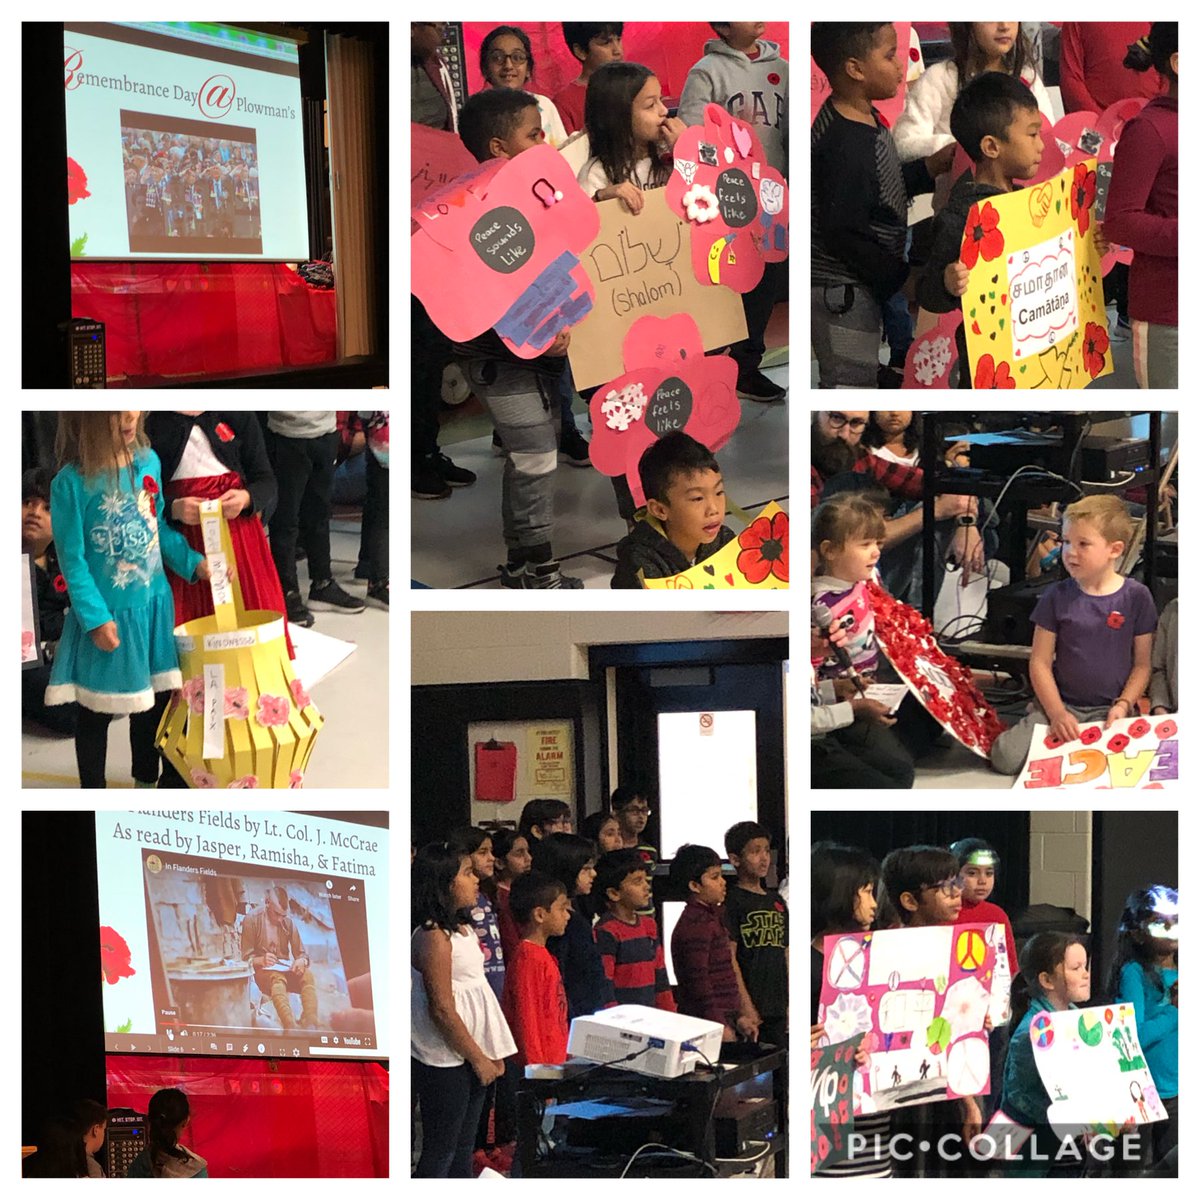 Messages of Peace at Plowman’s Remembrance Day Assembly - ‘Lest We Forget’. #PlowmamsRemembers #PeelRemembers ⁦@PeelSchools⁩ ⁦@GSolomonHenry⁩